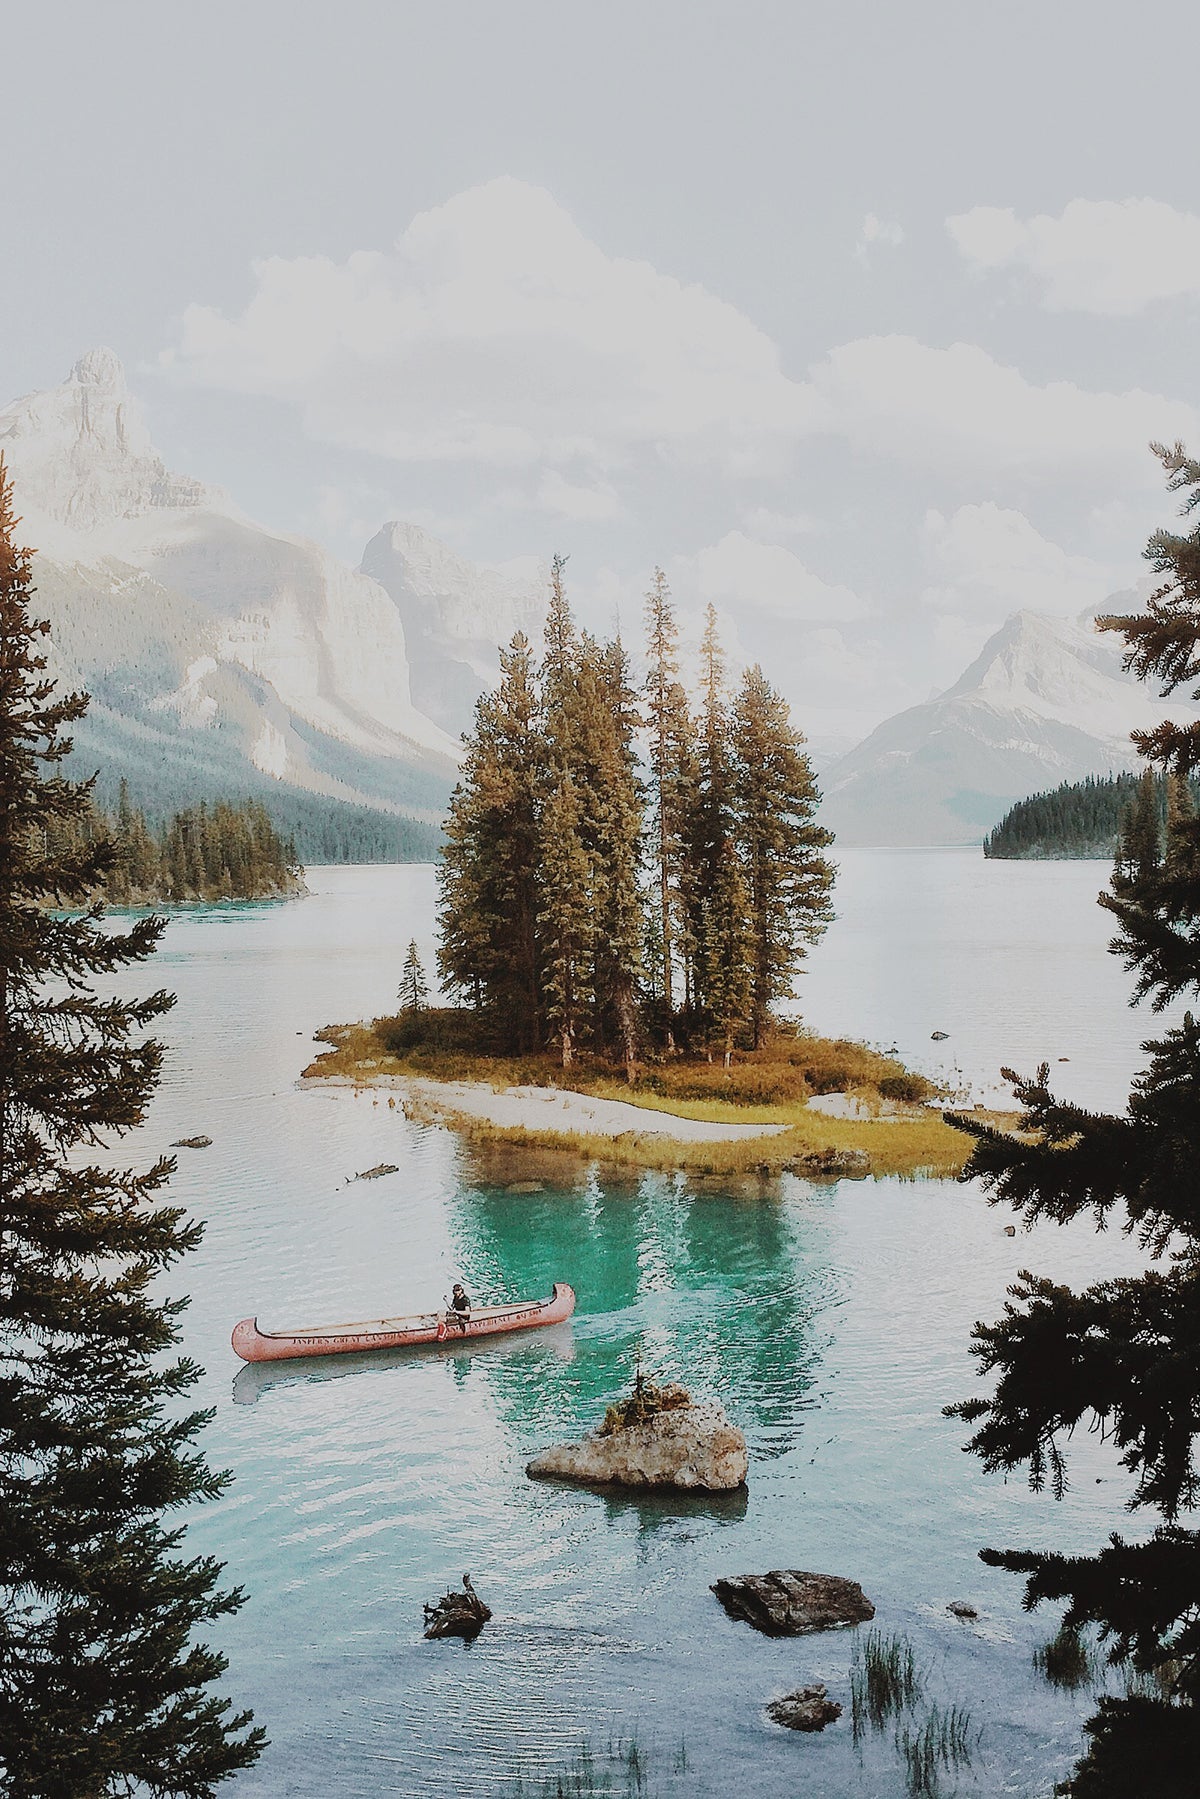 Photo by Alex Strohl of small island in a lake surrounded by mountains